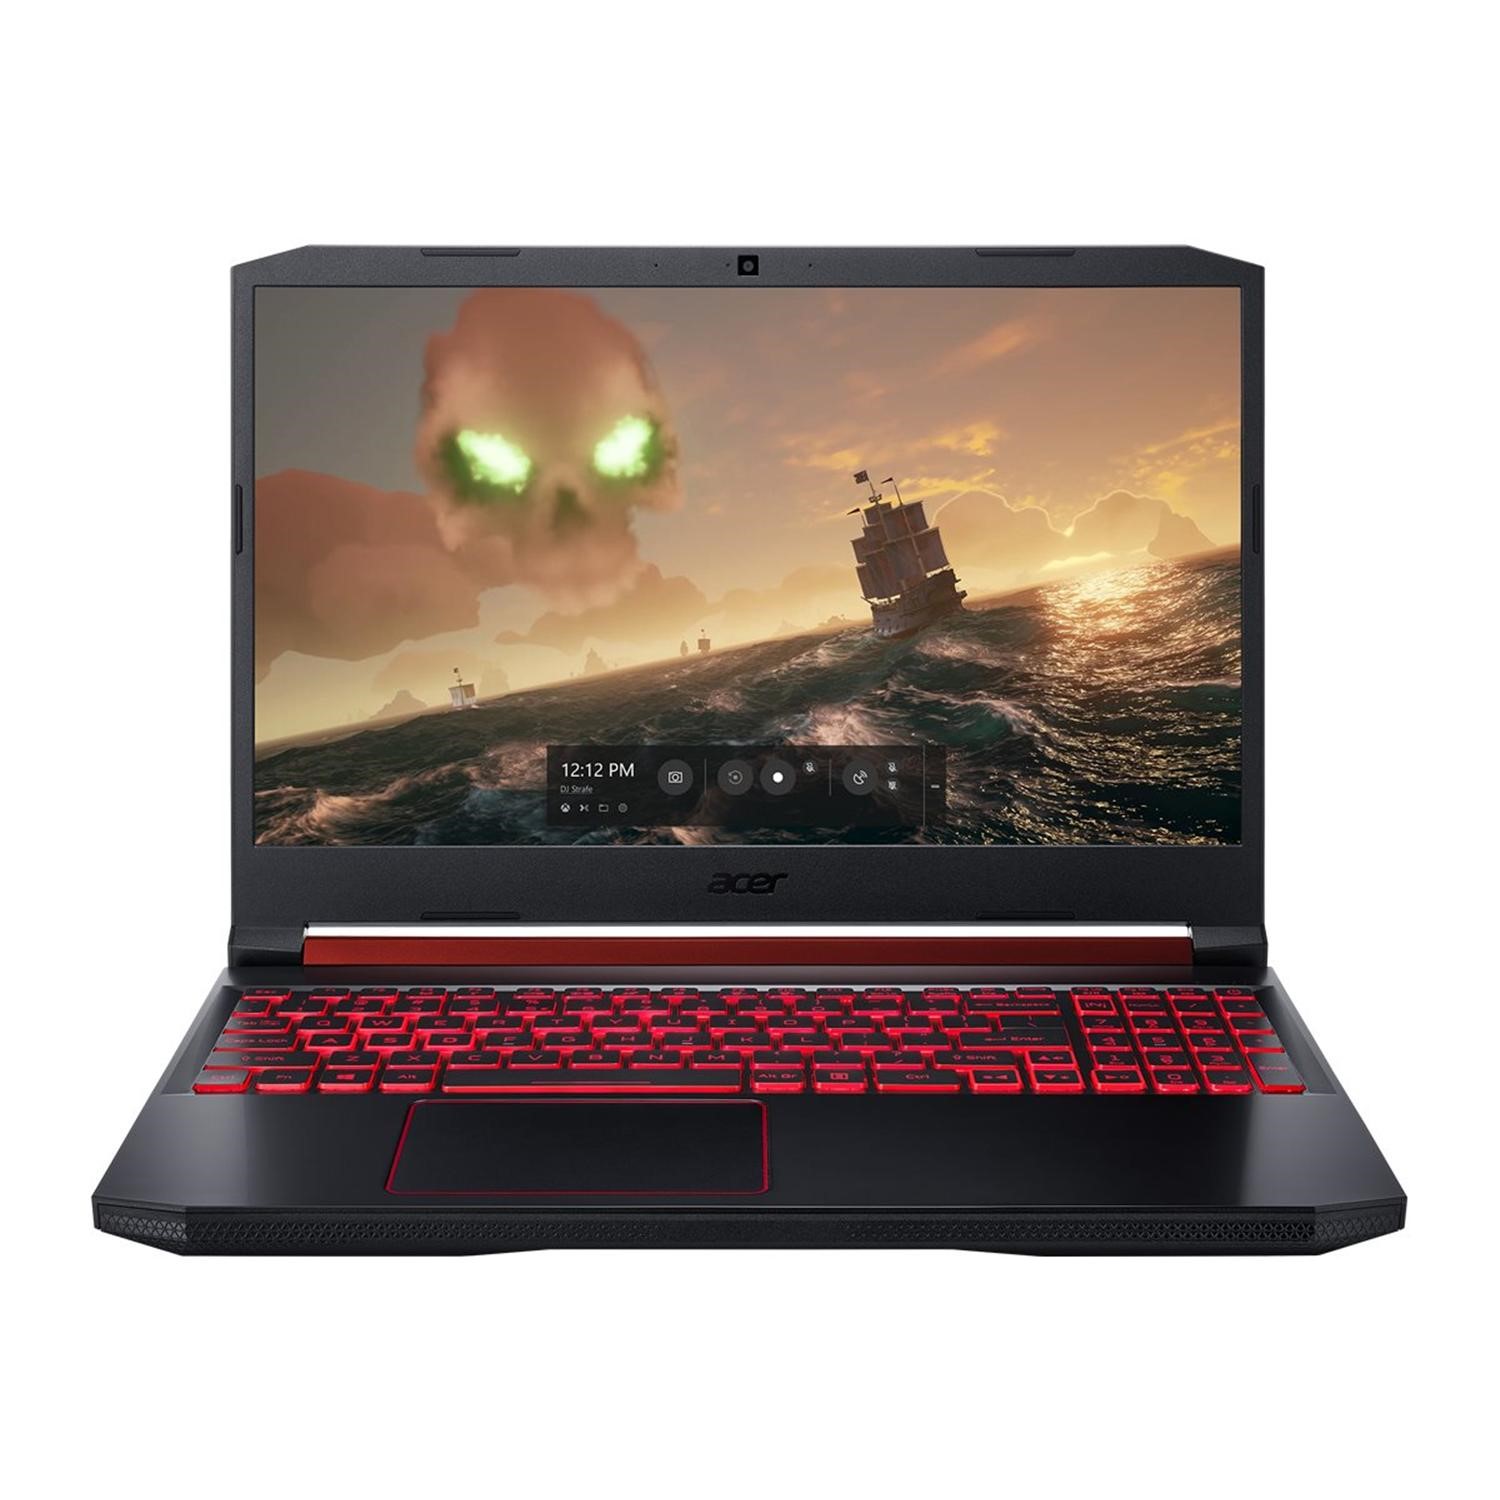 initial historie tempereret Acer Nitro 5 AN515-54 Core i5-9300H 8GB 1TB HDD + 128GB SSD 15.6 Inch FHD GeForce  GTX 1660 Ti 6GB Wi - Laptops Direct